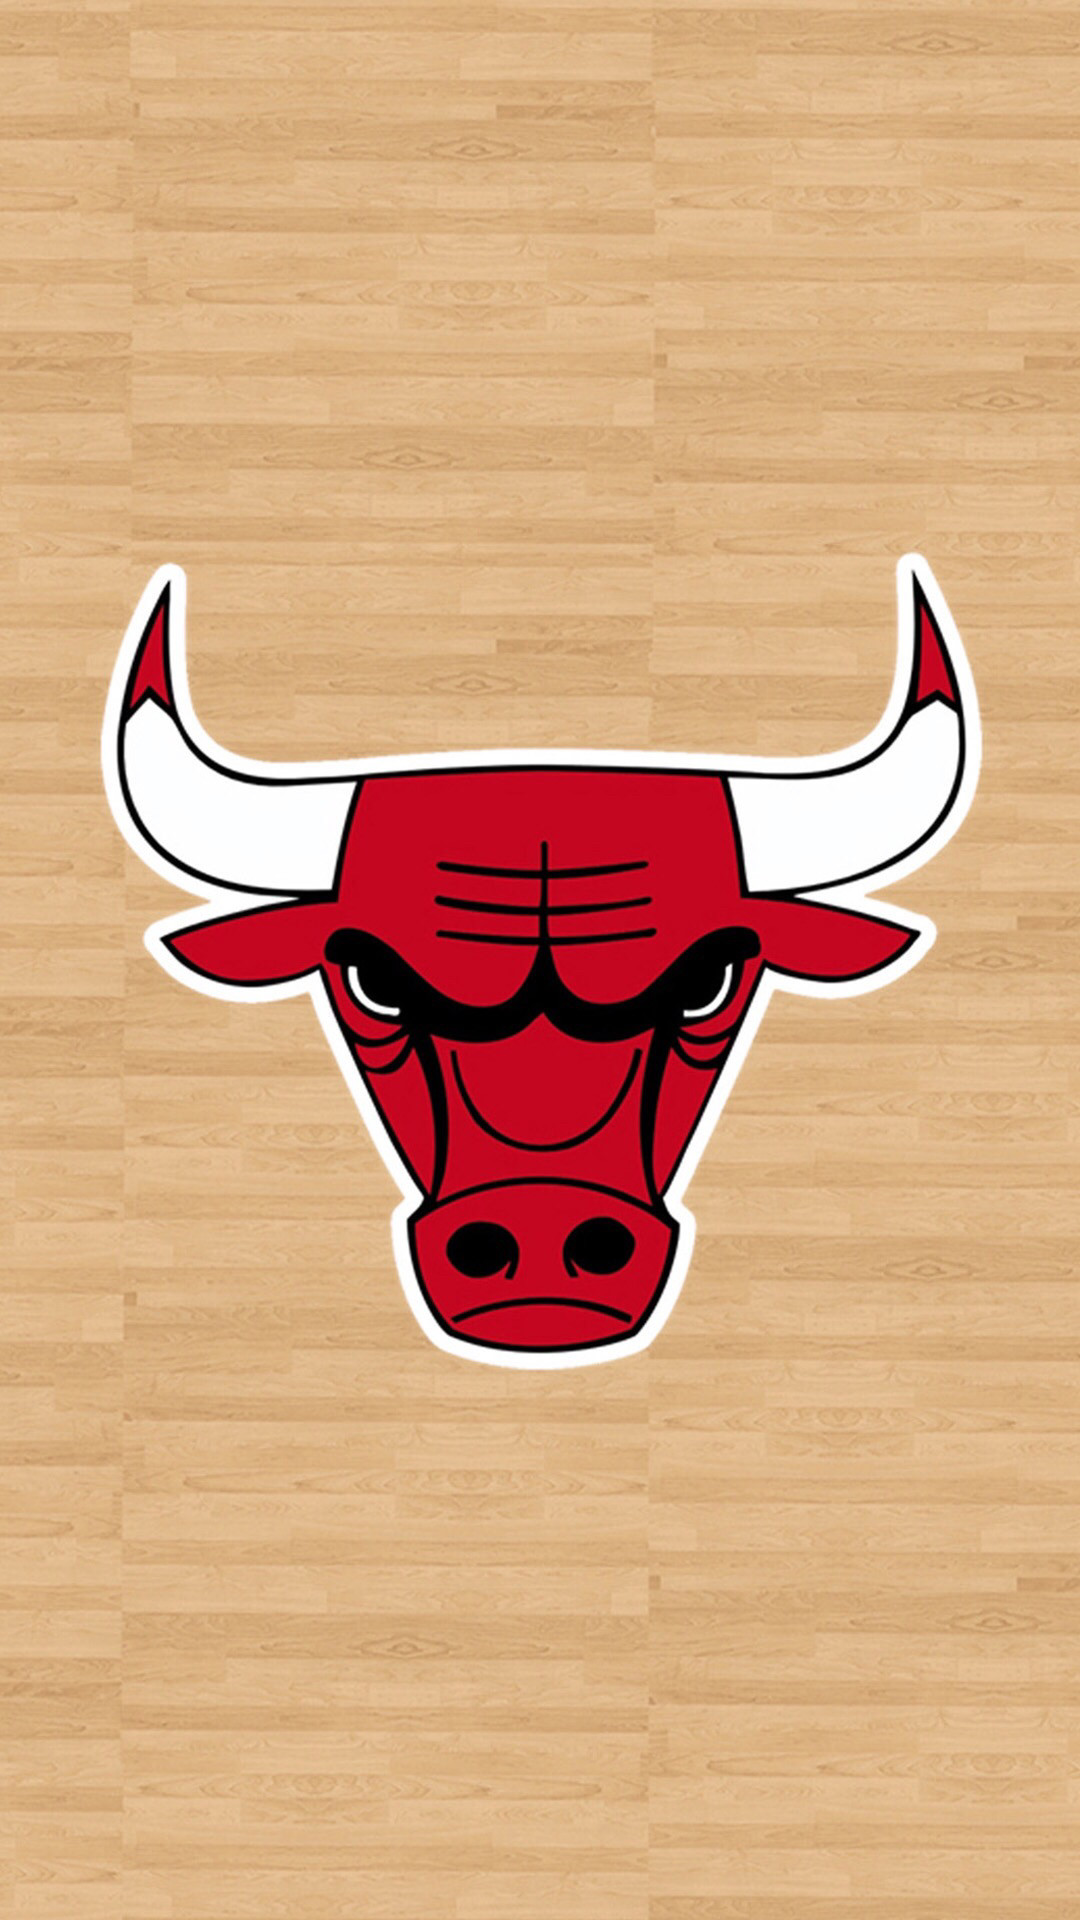 1080x1920 Chicago Bulls Wallpaper by WildSketchbook on DeviantArt | Chicago Bulls |  Pinterest | Bulls wallpaper, Chicago bulls and Chicago